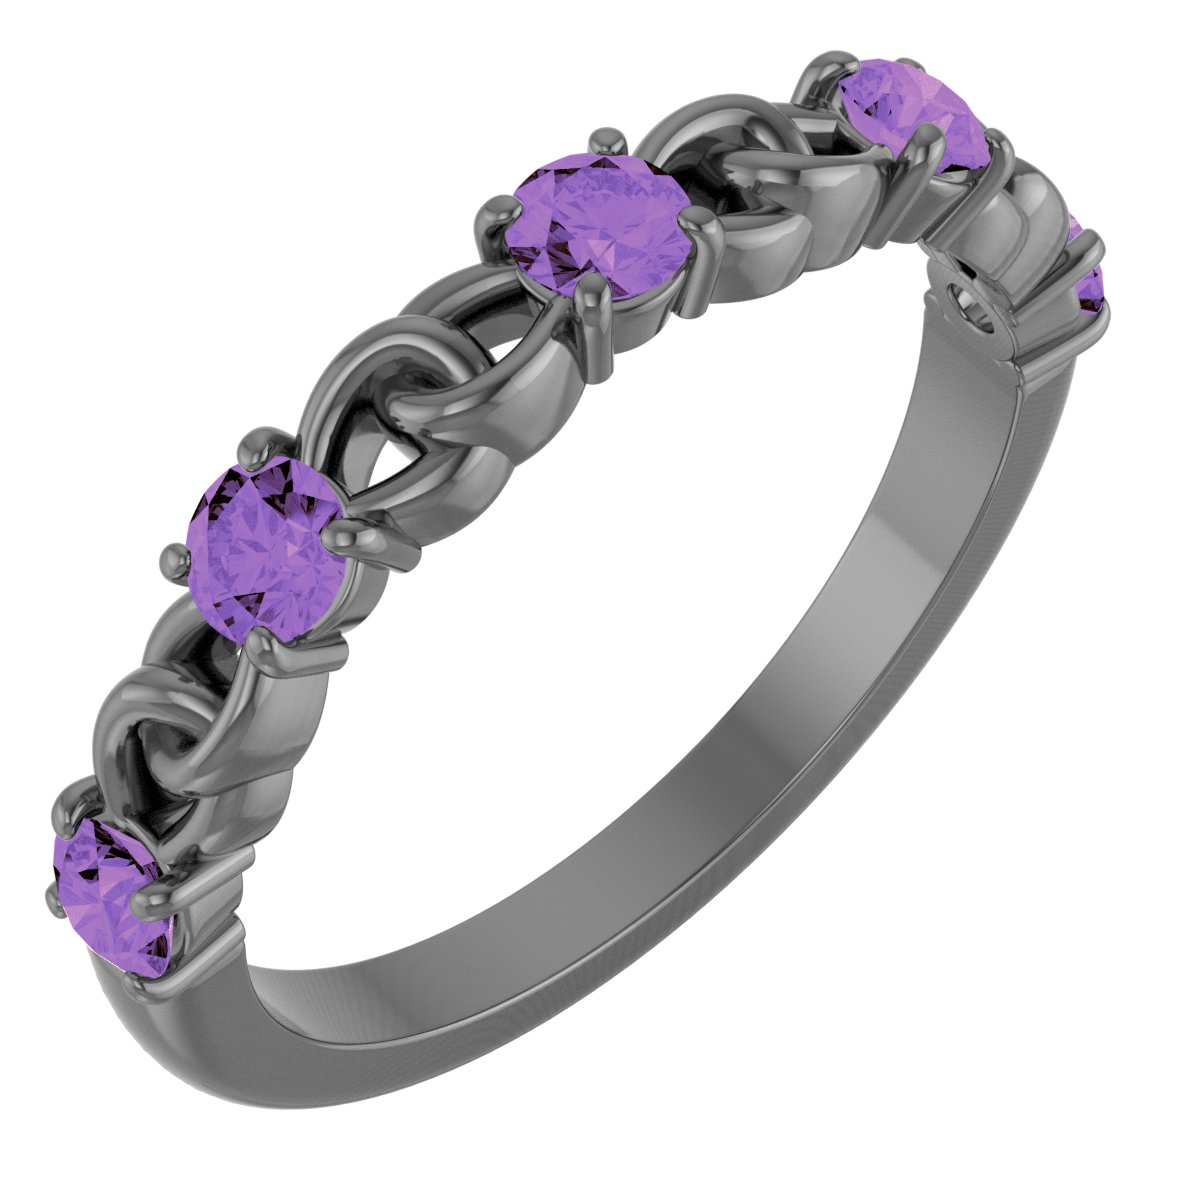 14K Yellow Amethyst Stackable Link Ring Ref 14773053